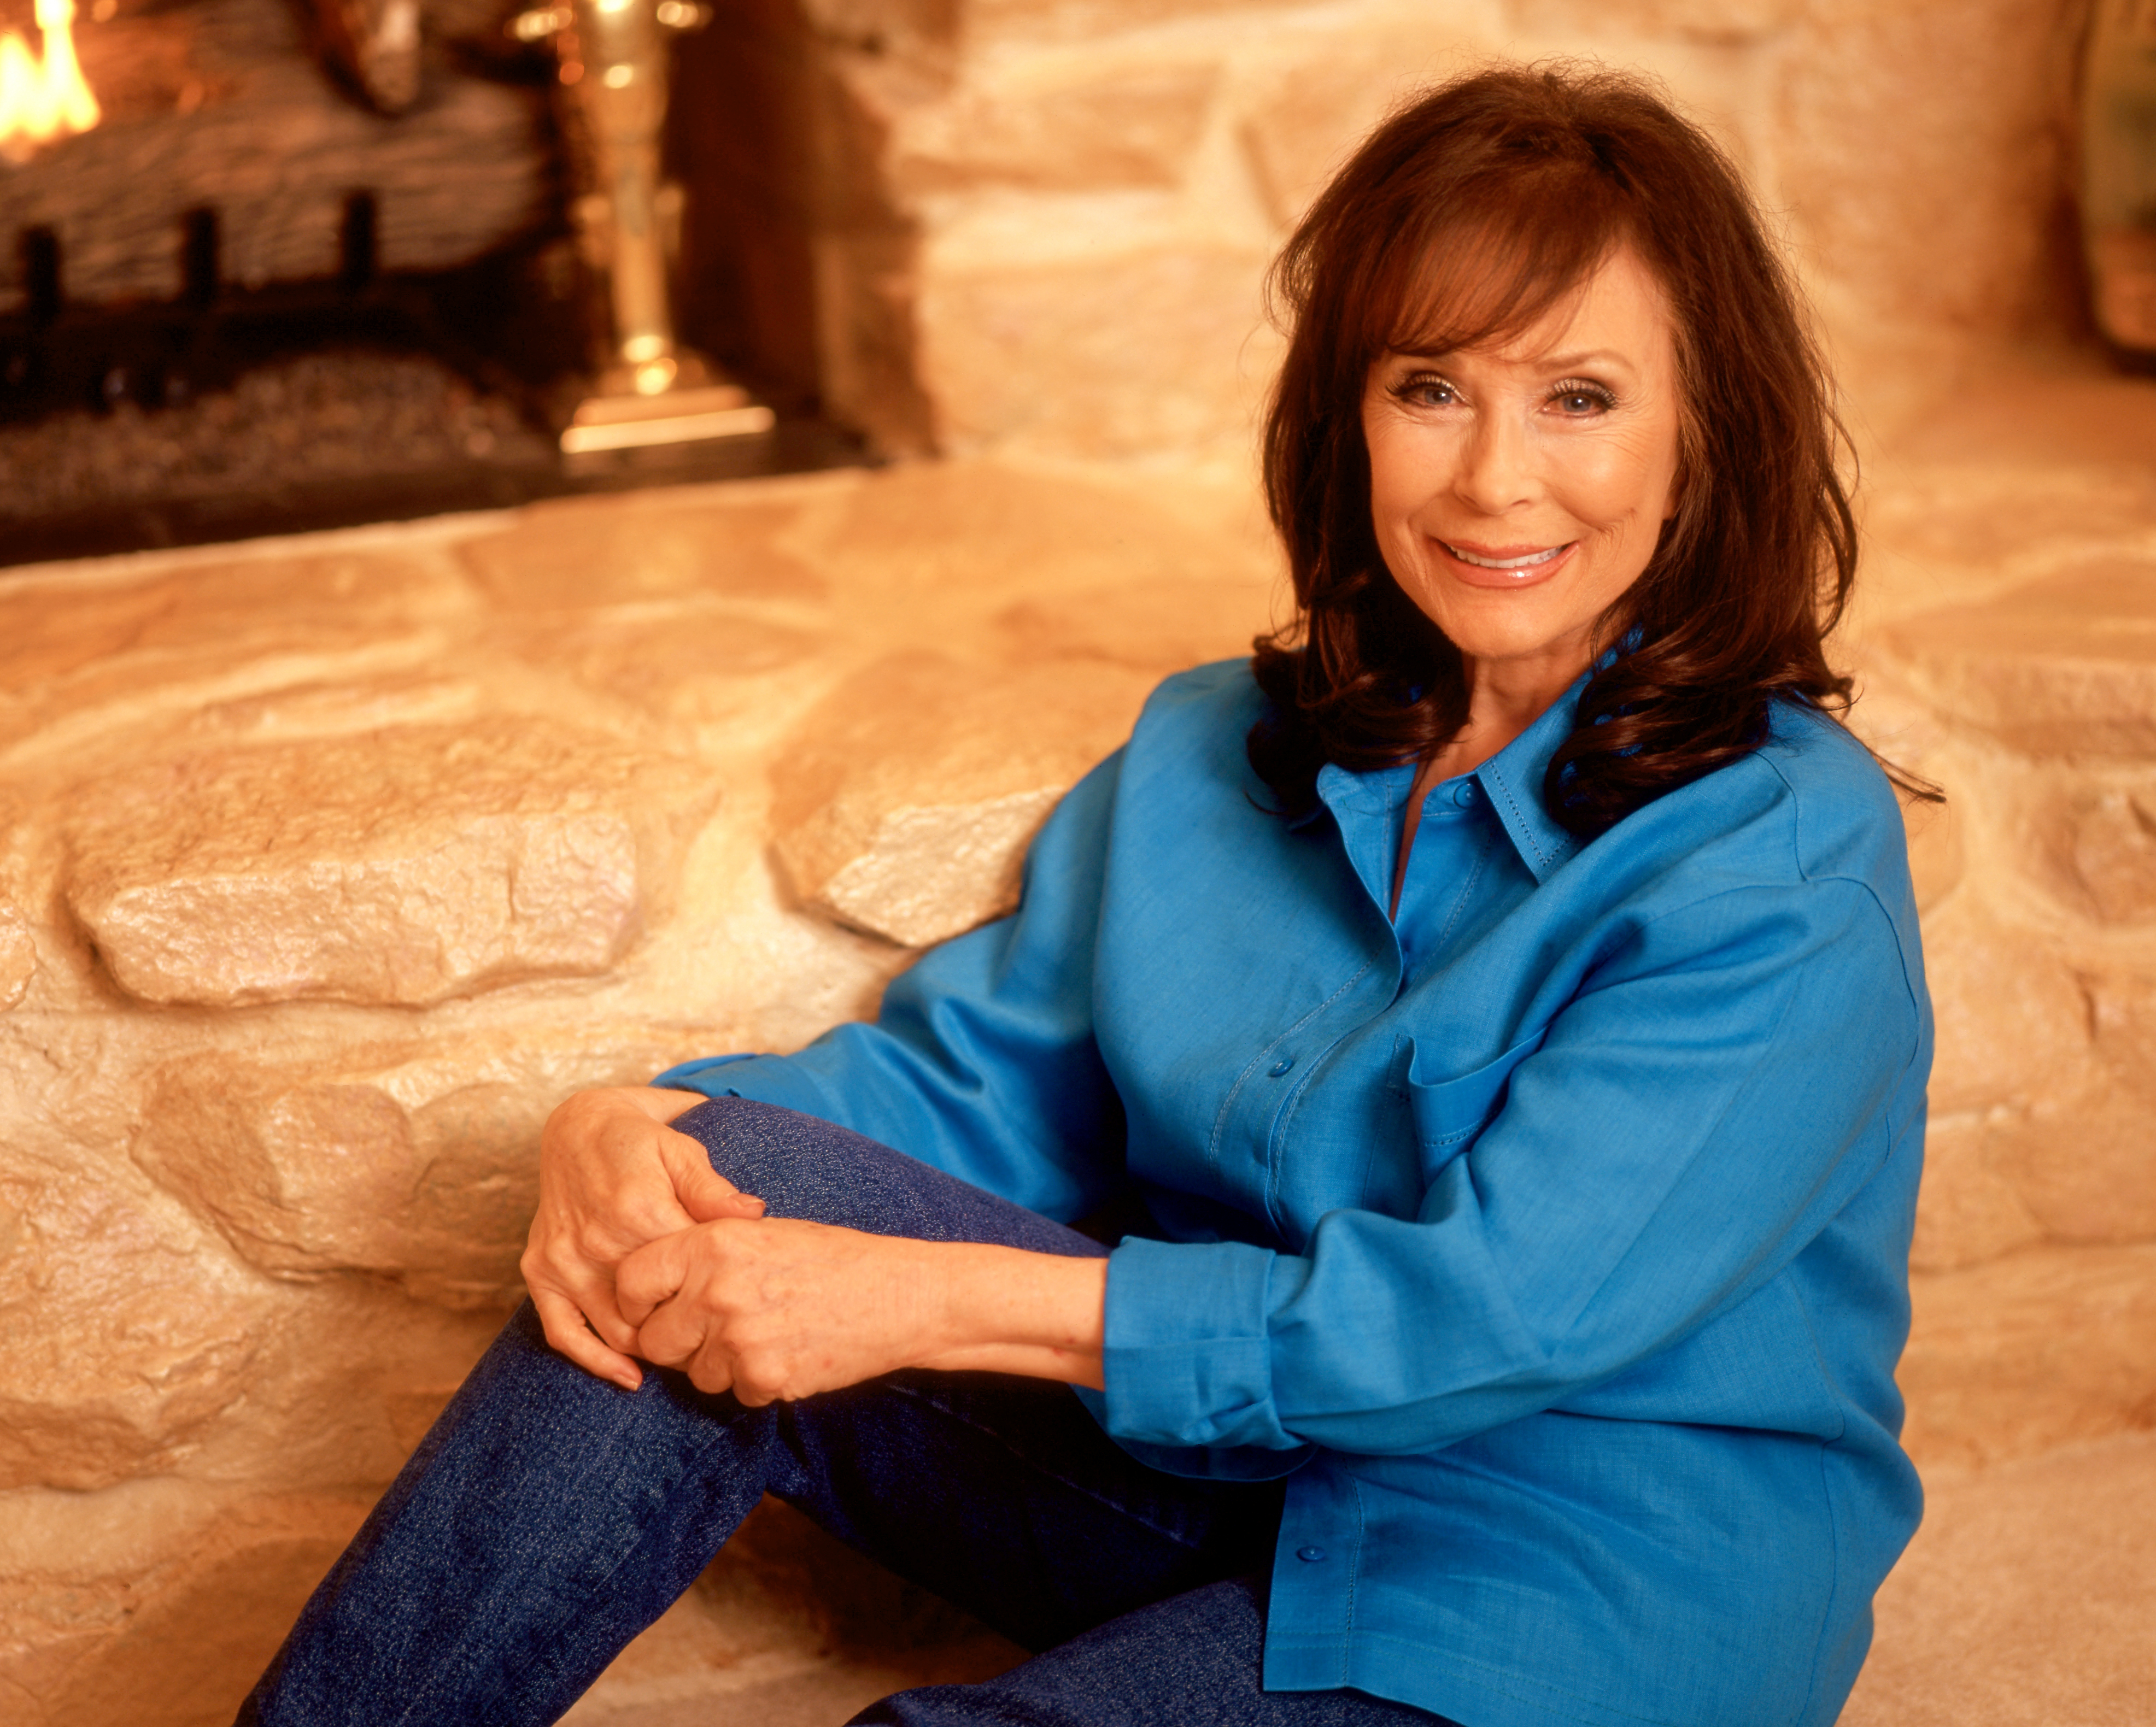 Loretta Lynn poses for a portrait in front of her fireplace in 1997 in Hurricane Mills, Tennessee. | Source: Getty Images